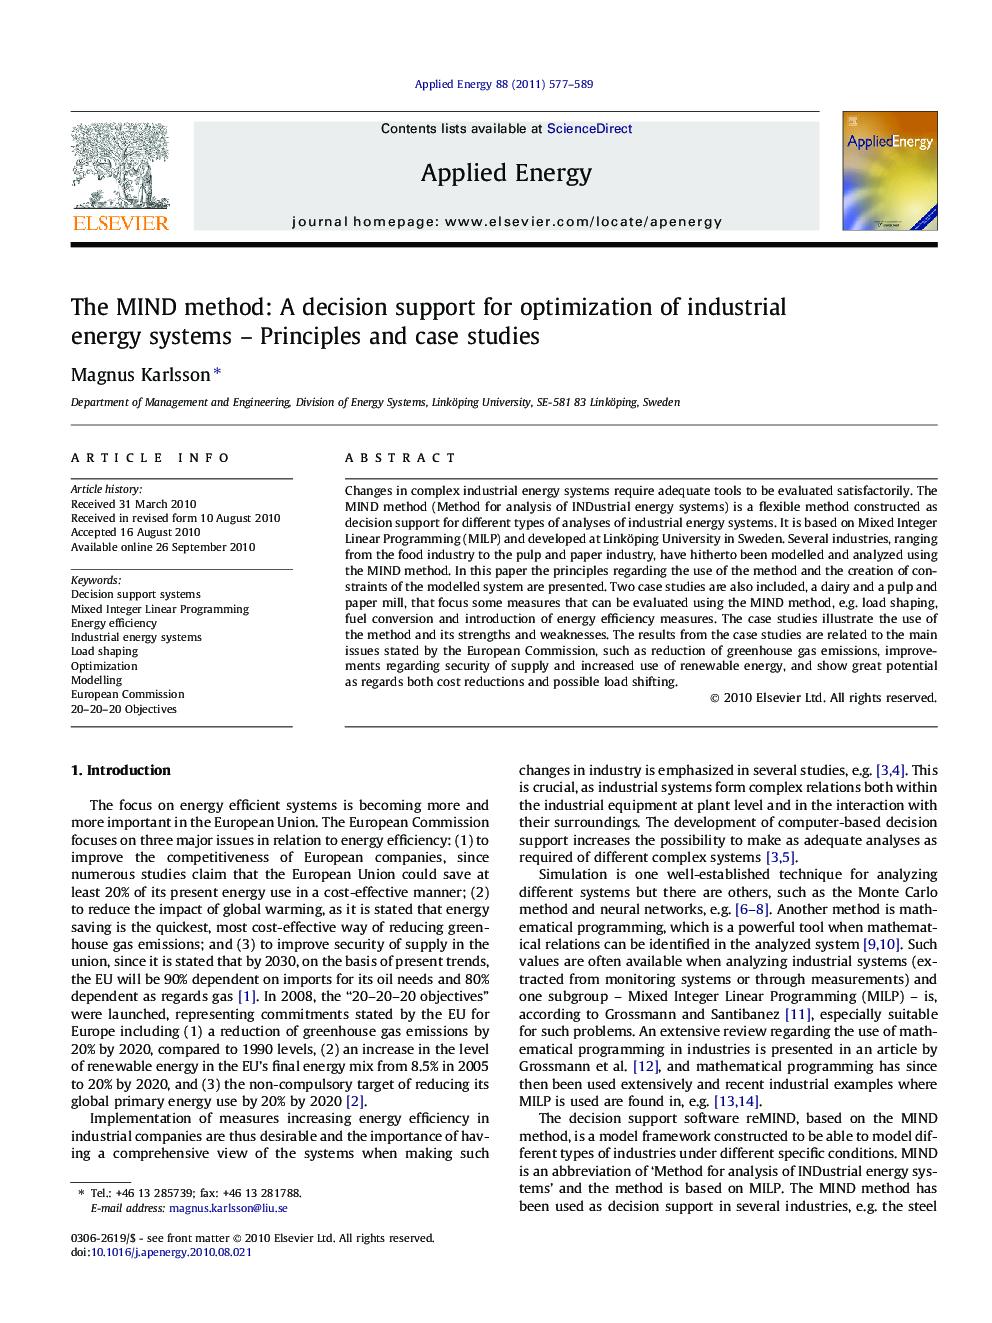 The MIND method: A decision support for optimization of industrial energy systems – Principles and case studies